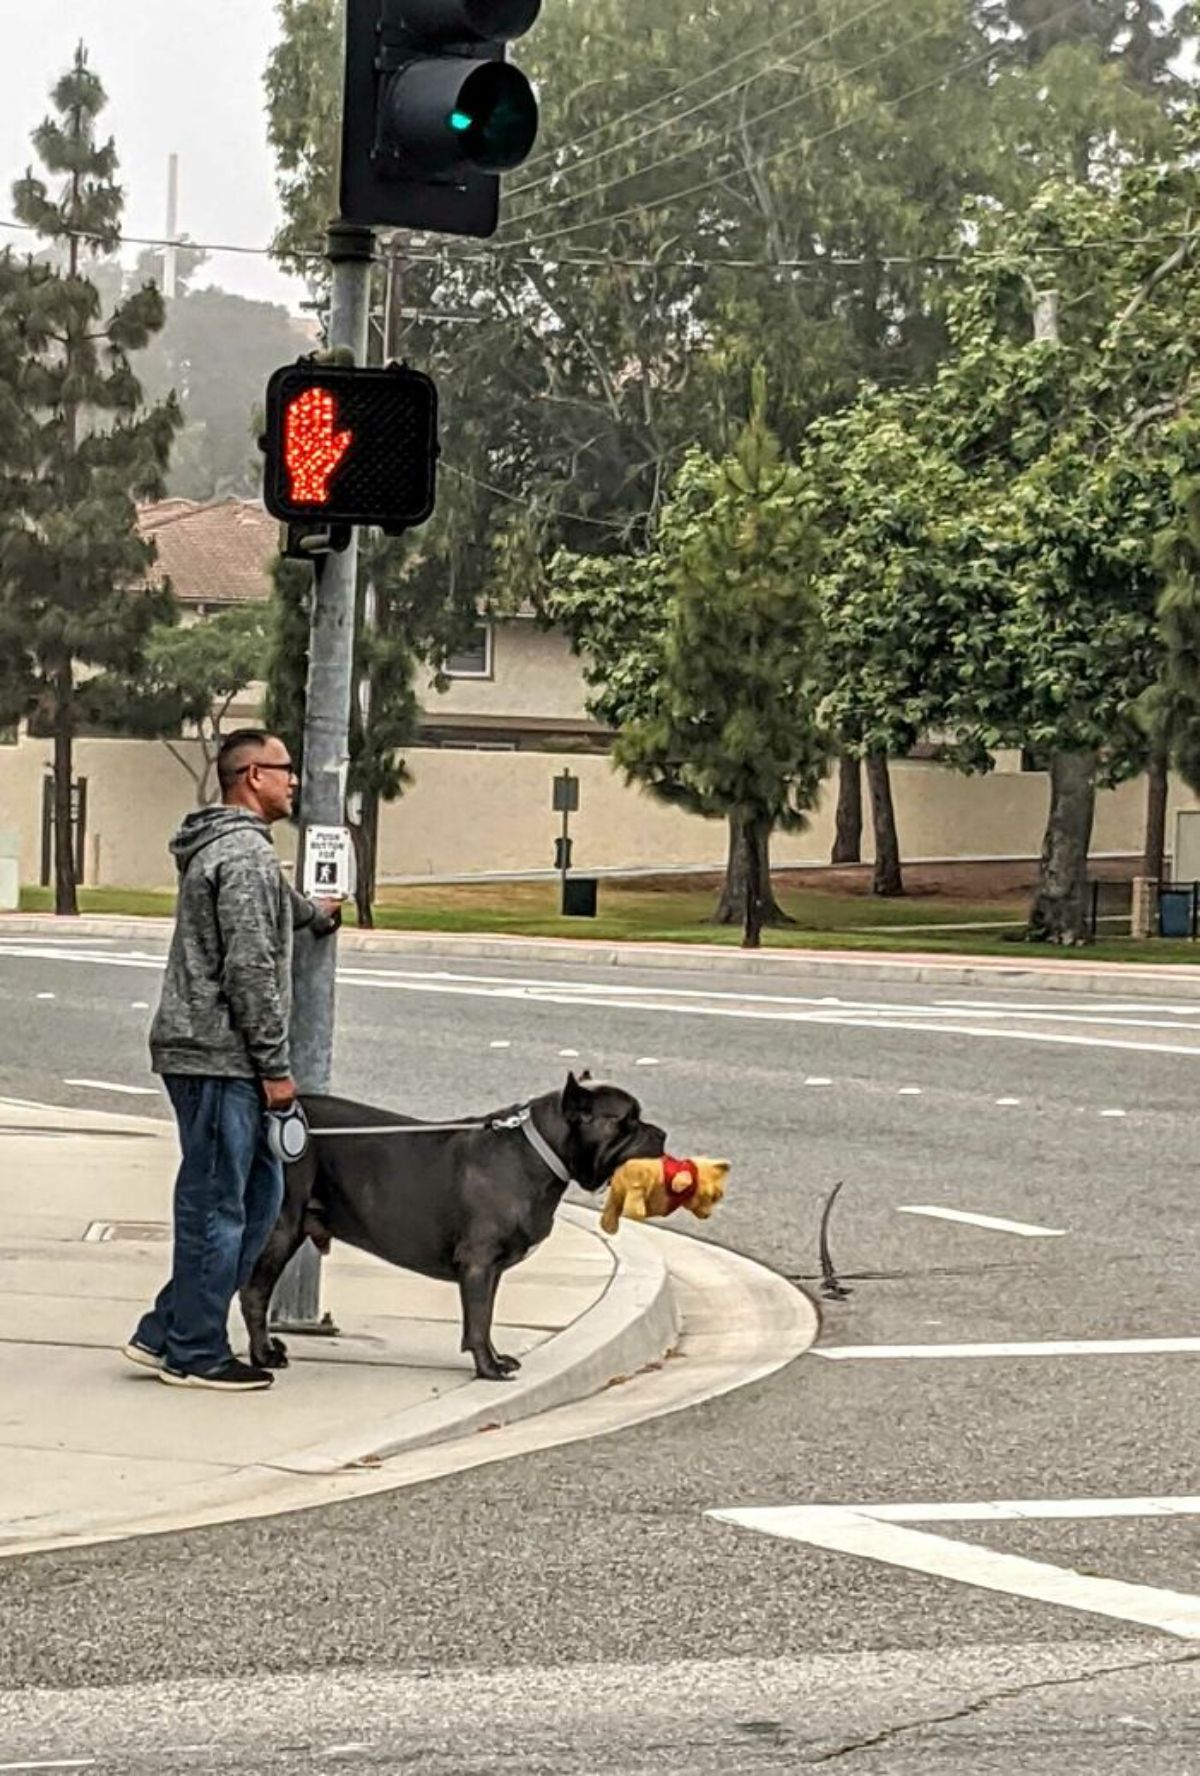 large black dog being held on leash by a man and the dog is holding a winnie the pooh toy in the mouth on a road waiting to cross